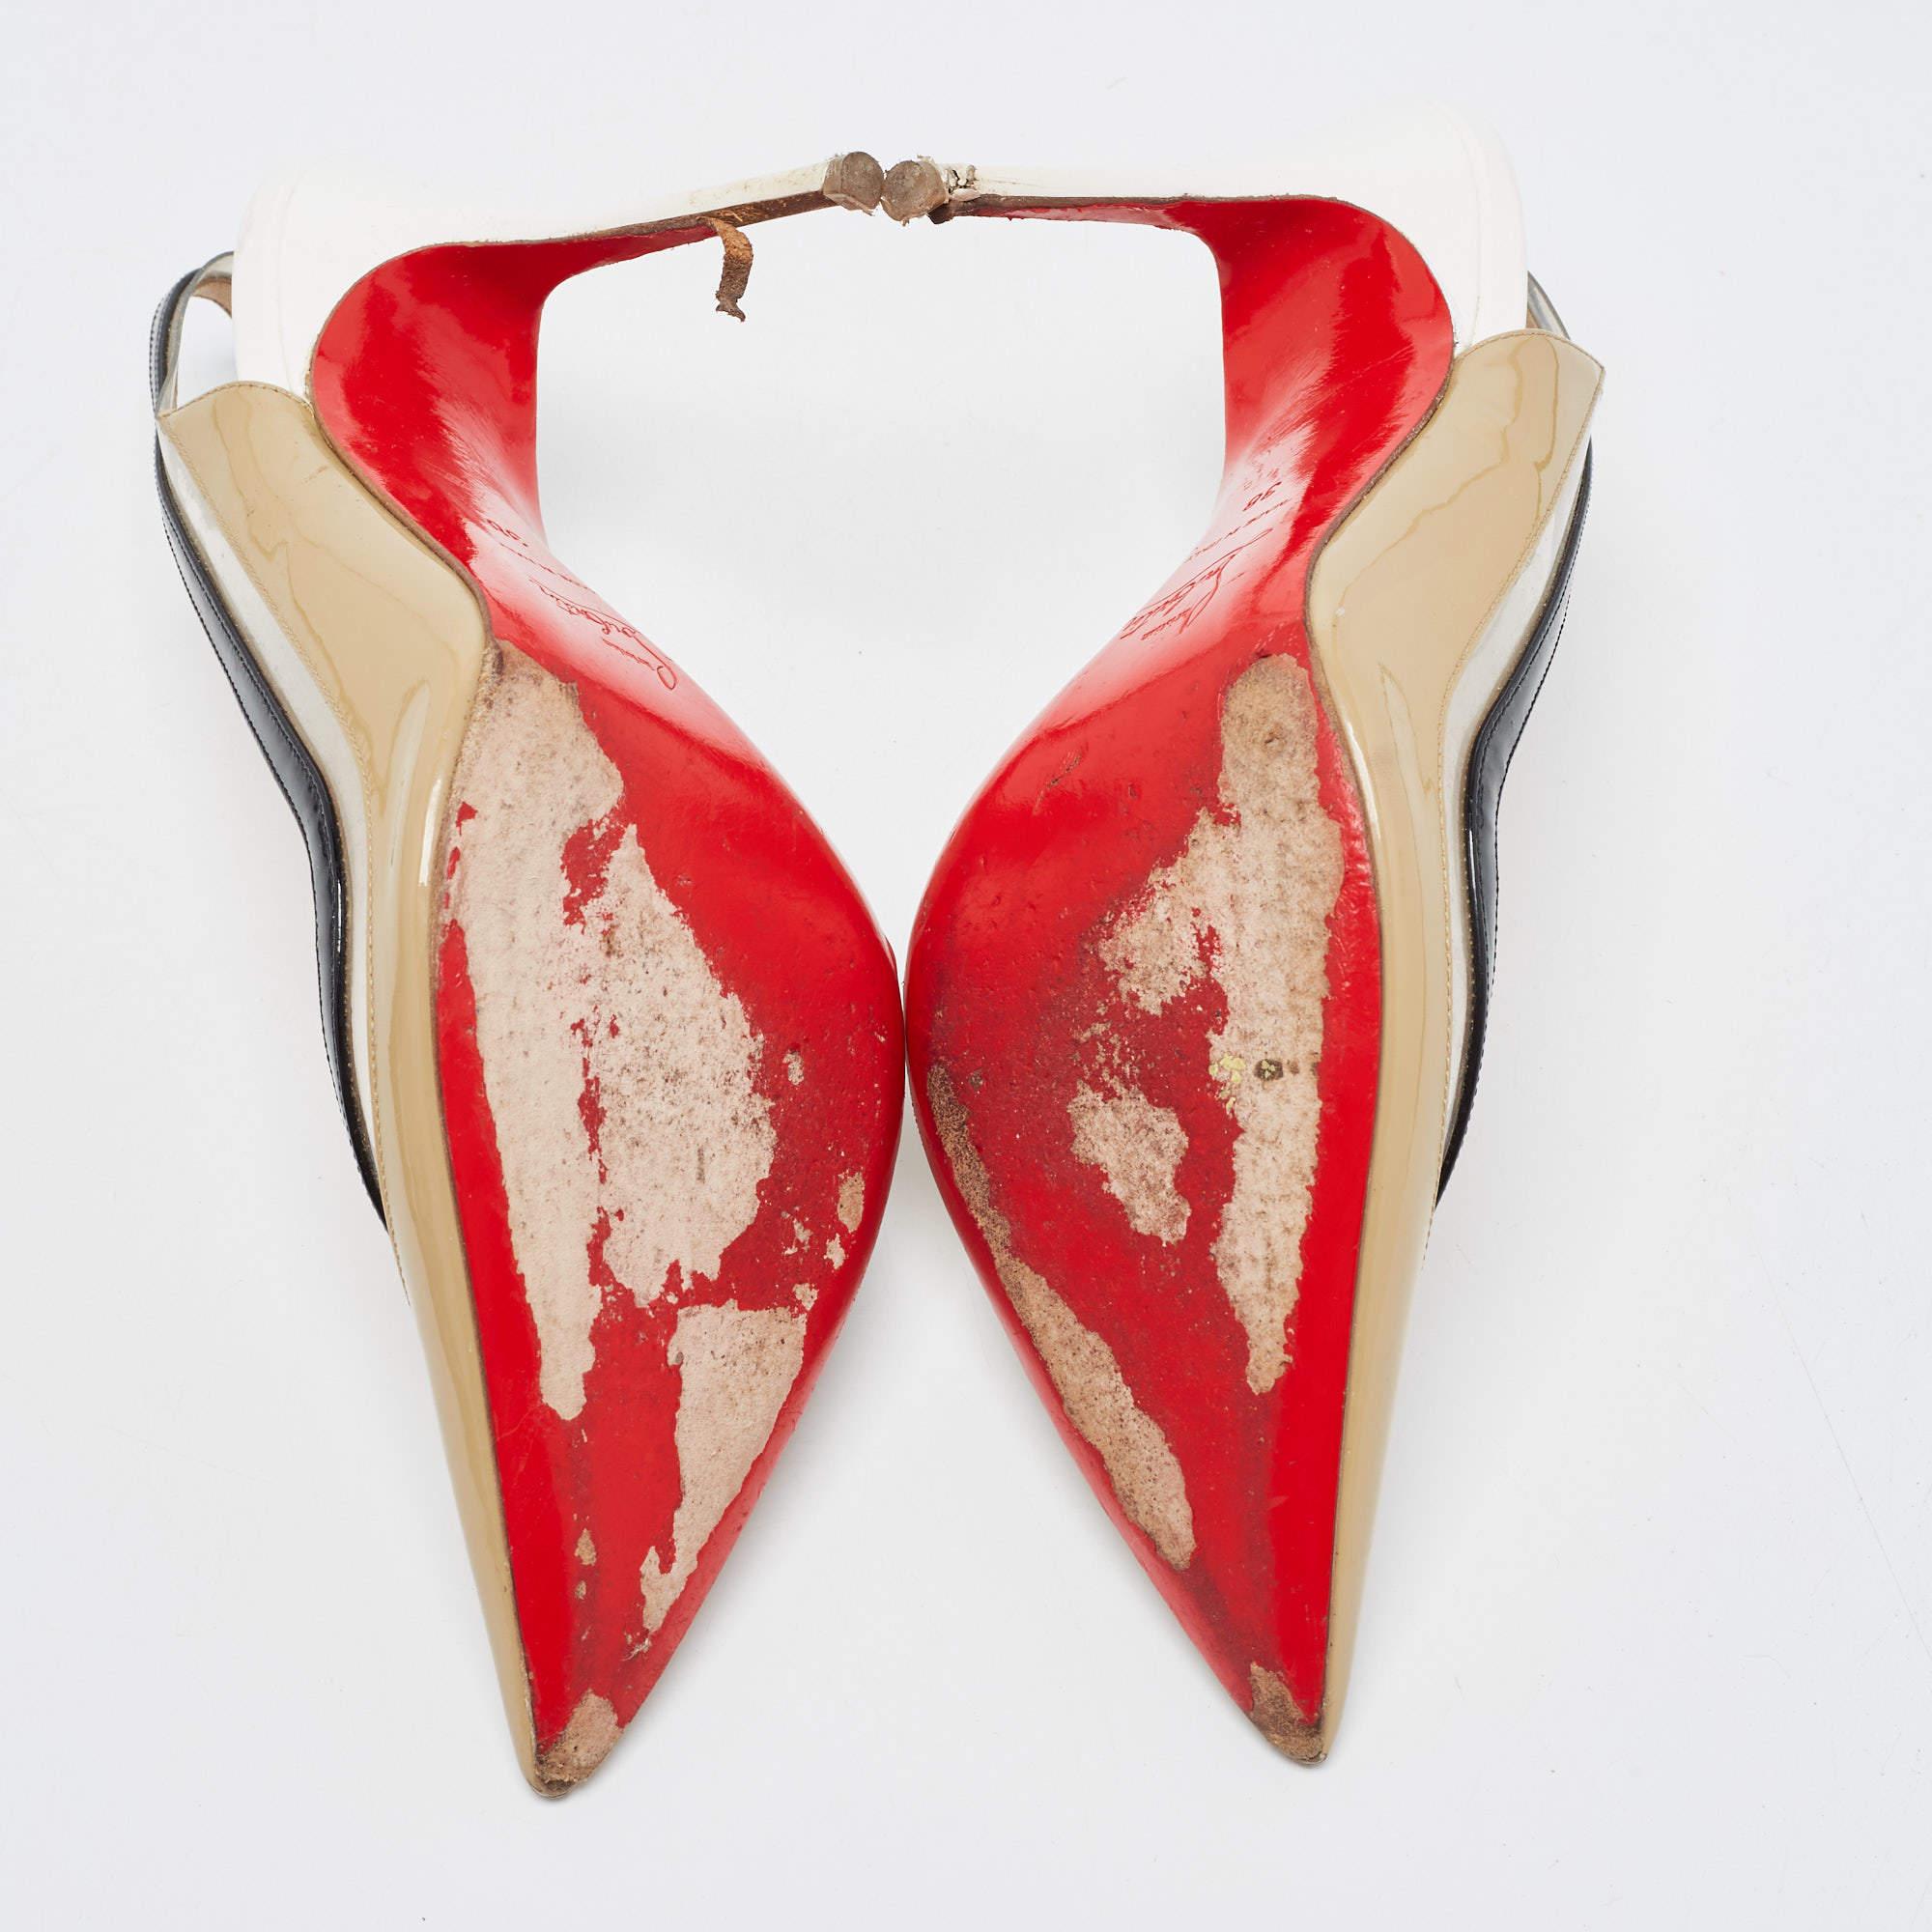 Christian Louboutin Tricolor Patent Leather and PVC Paulina Slingback Pumps Size For Sale 2